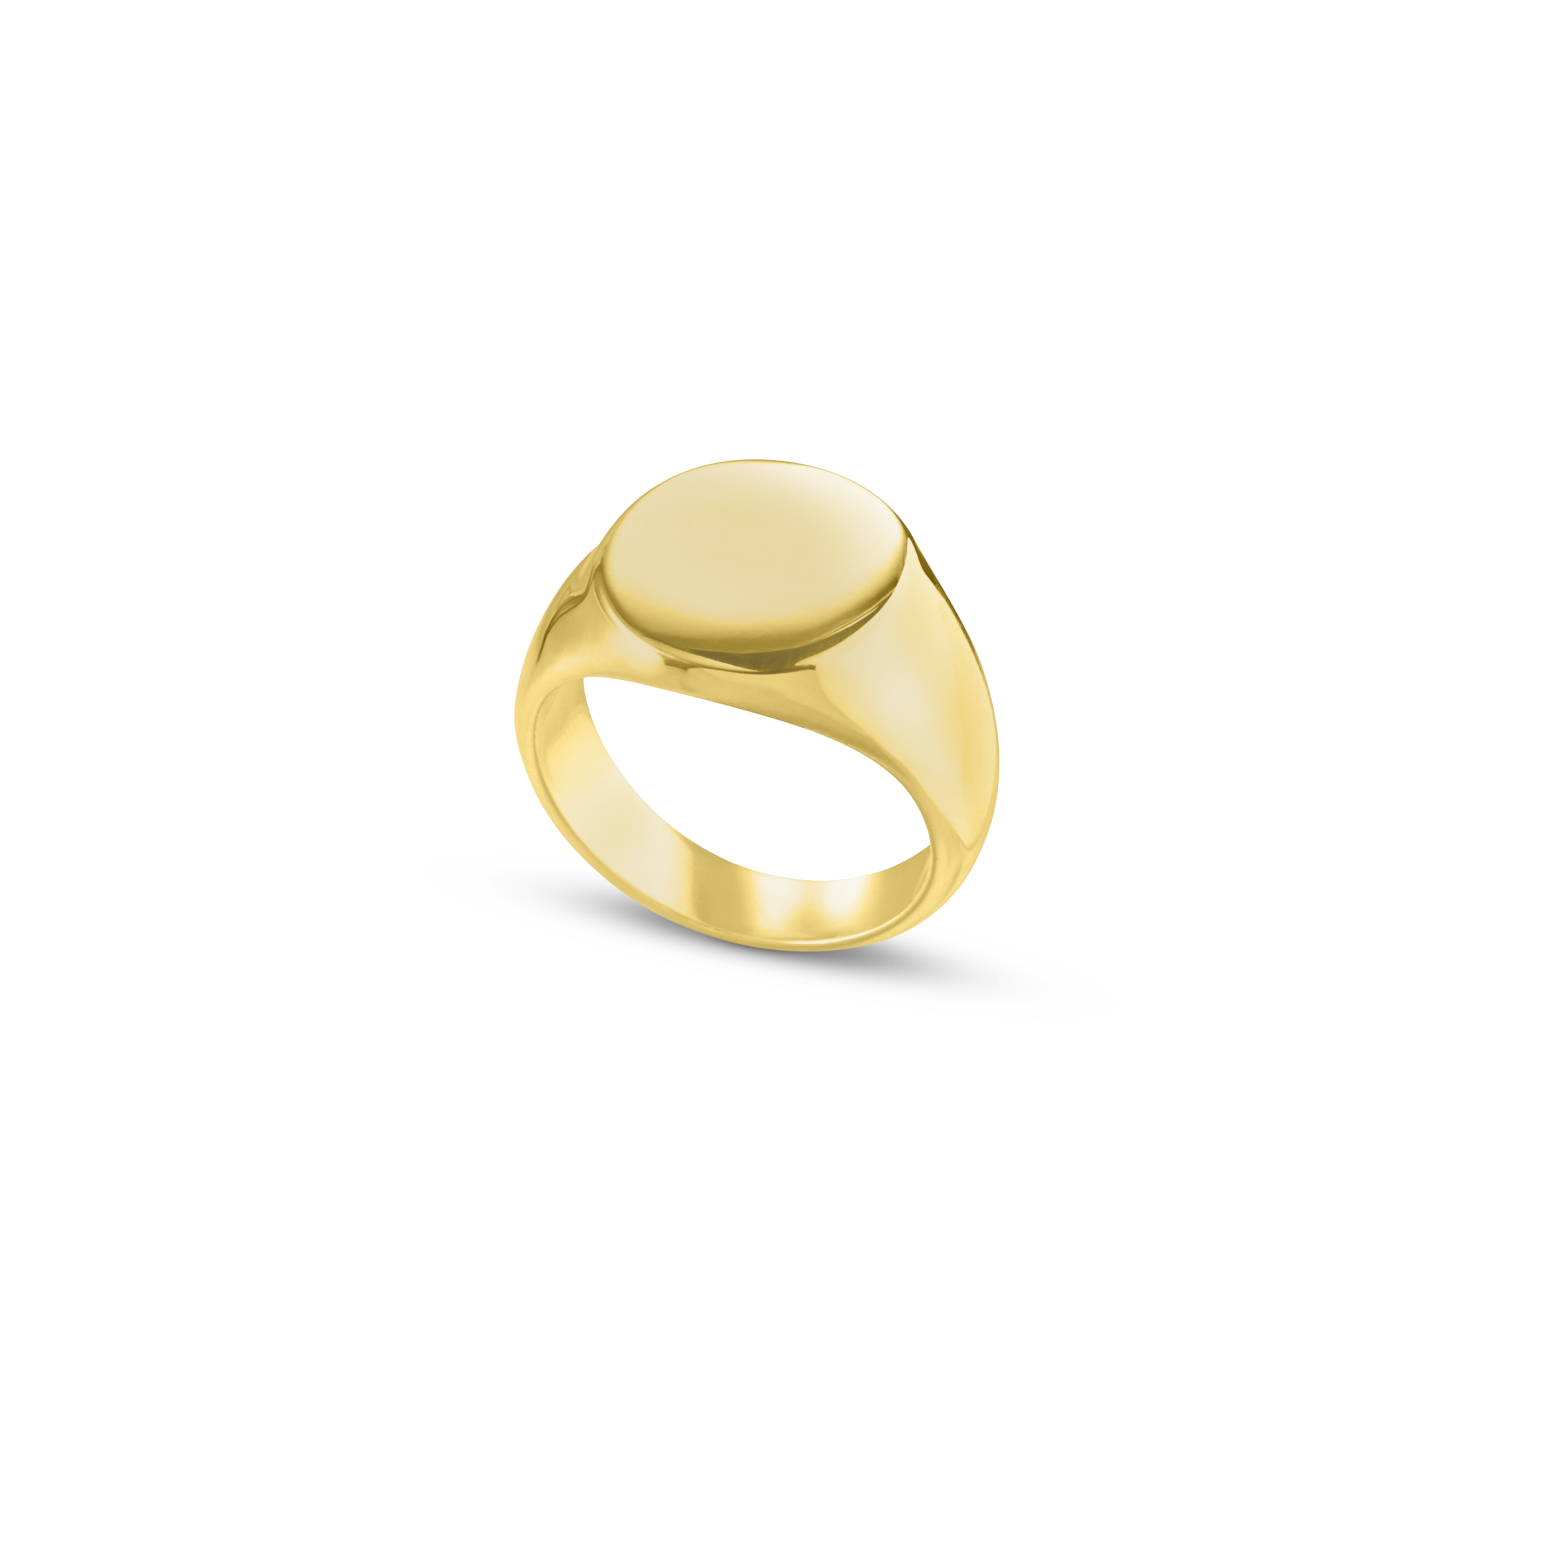 The Round Signet Ring